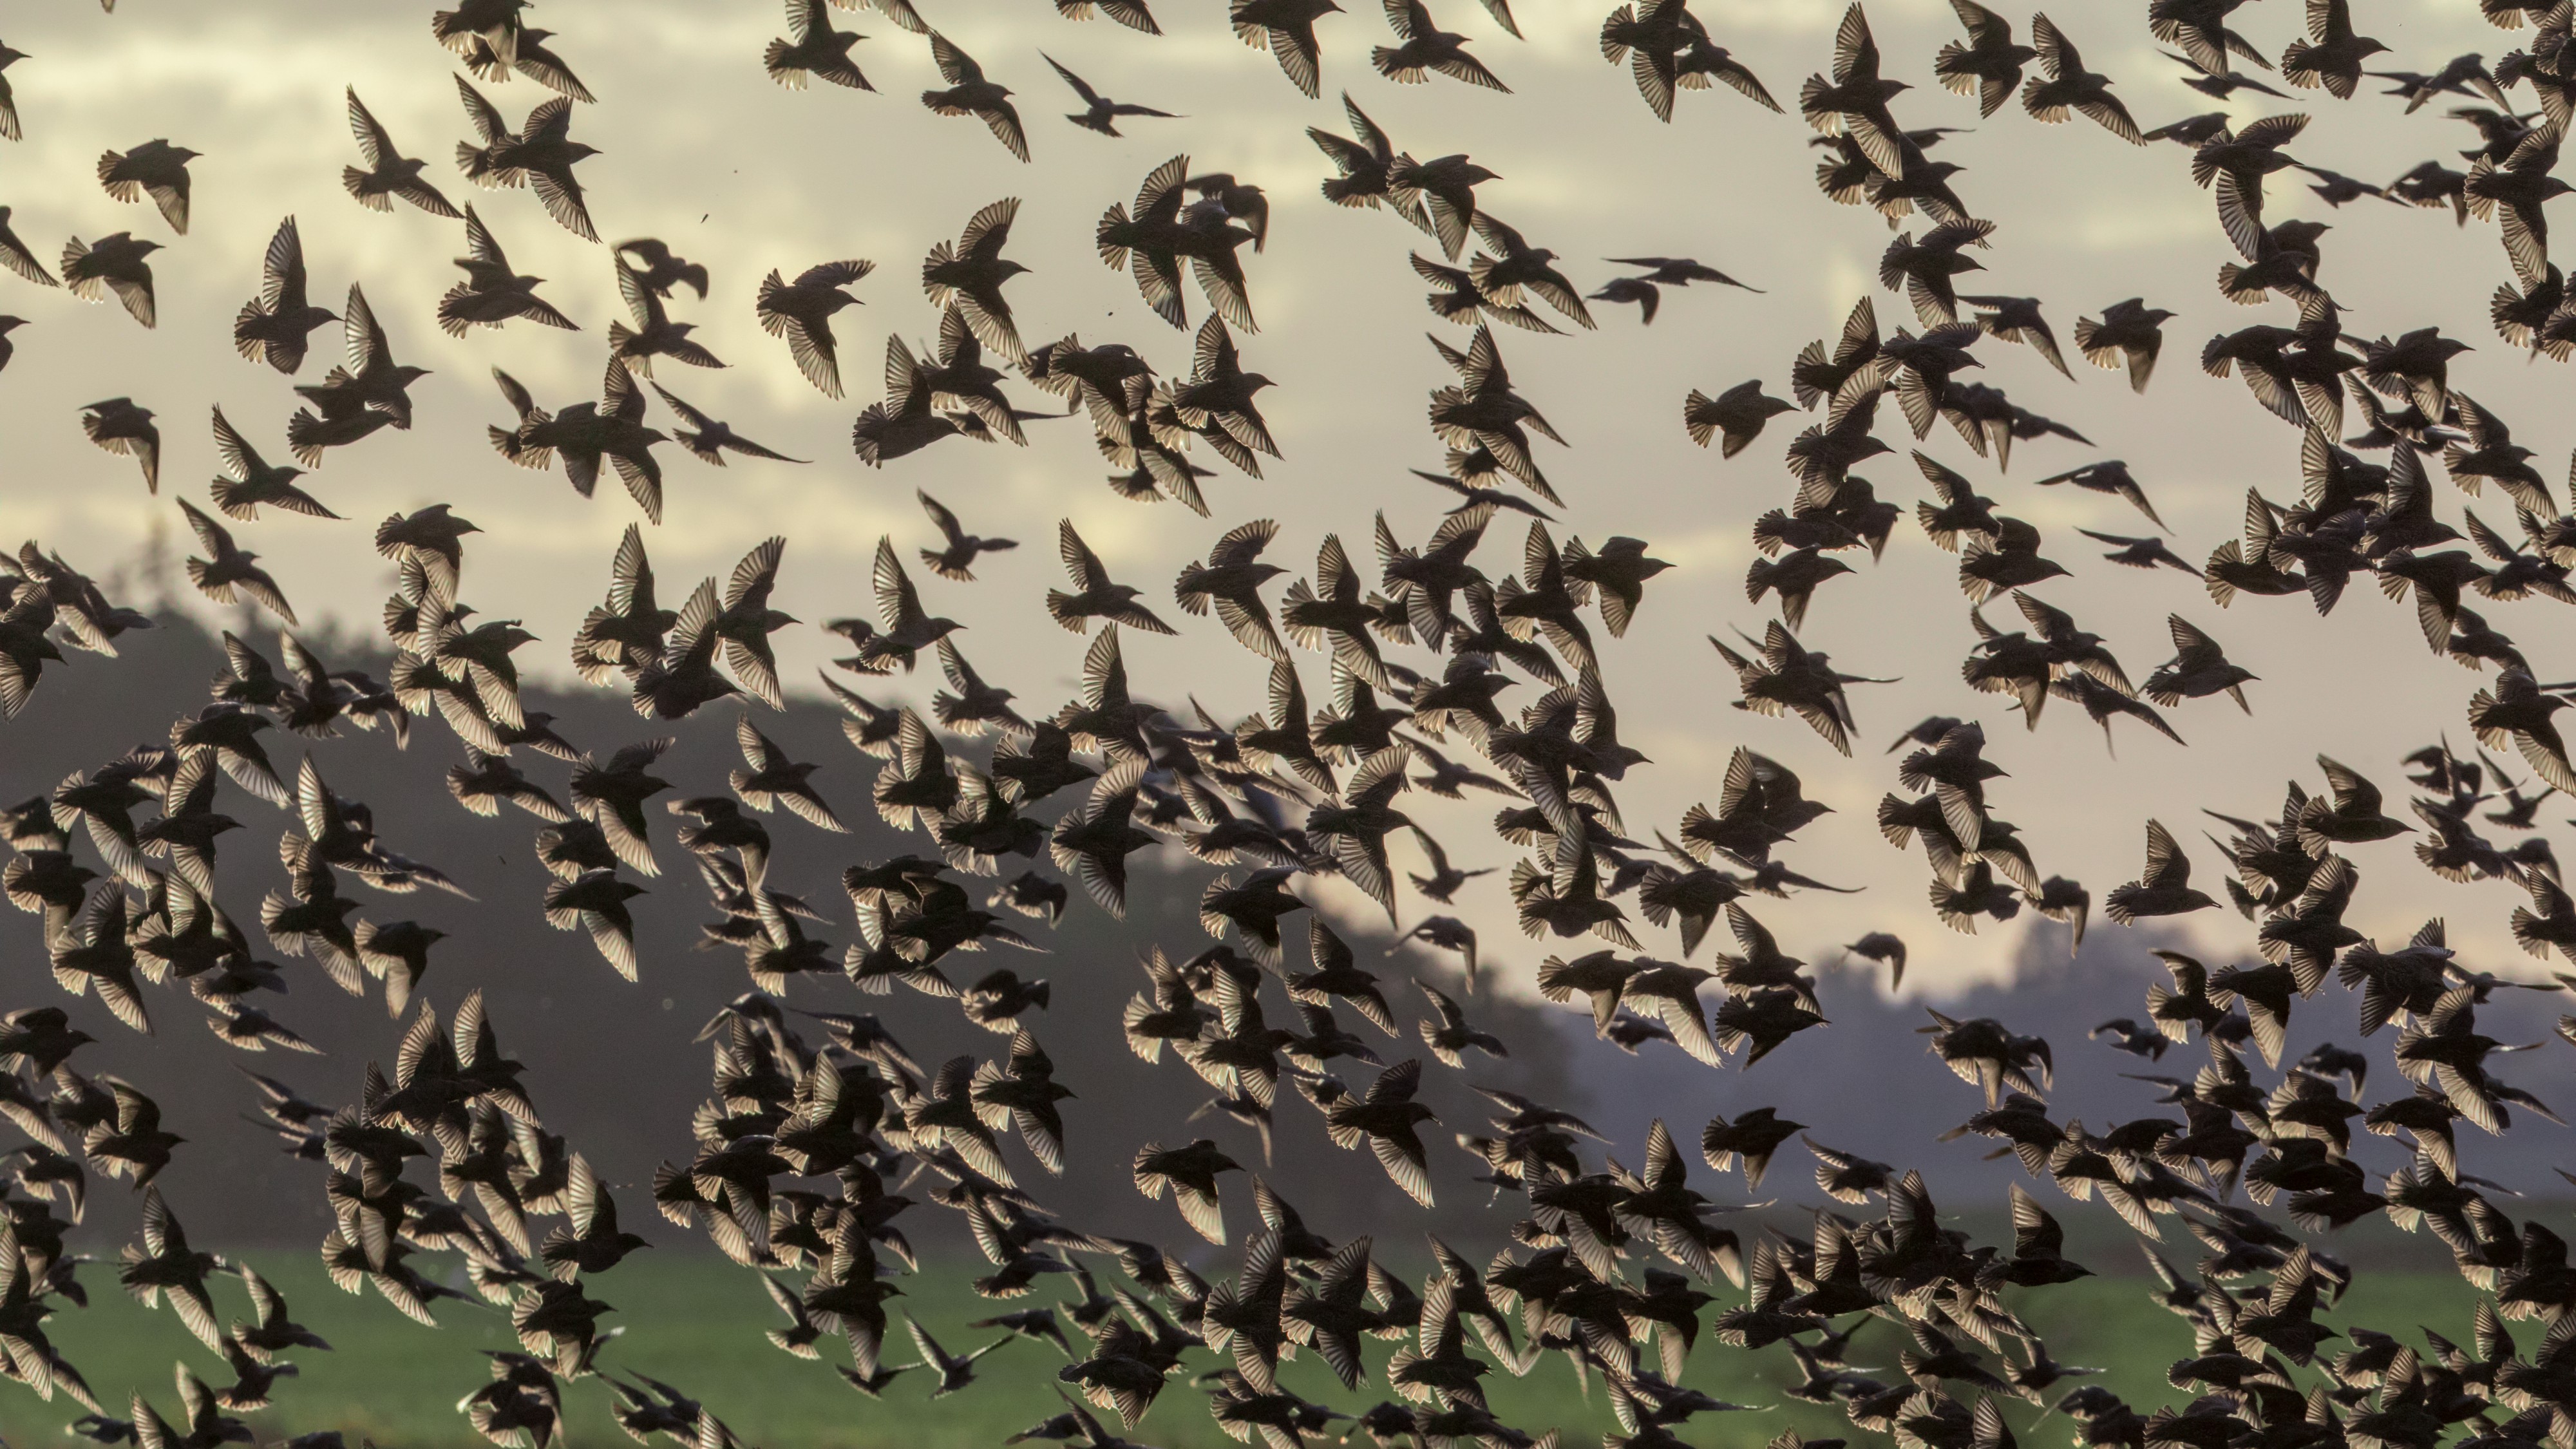 A flock of starlings (Sturnus vulgaris) gather in the evening hours in autumn